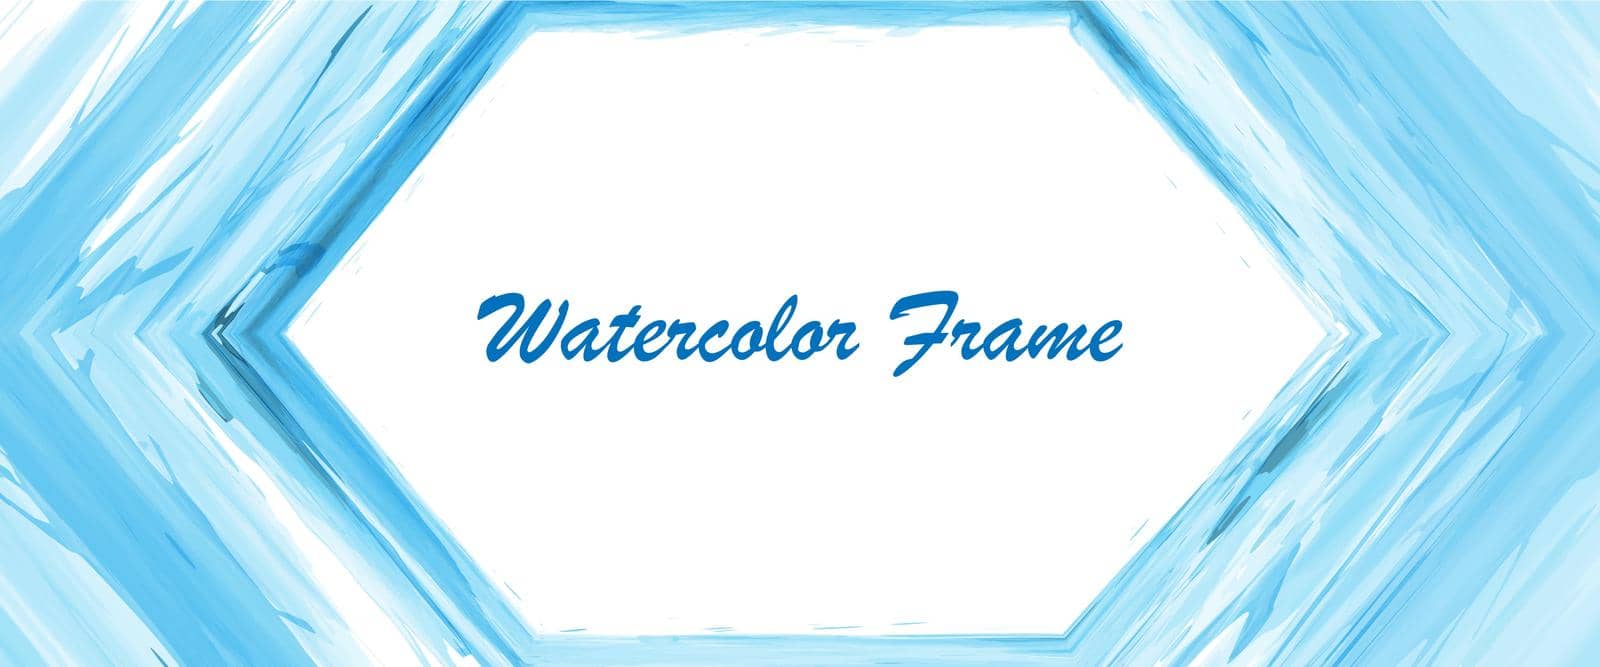 Blue watercolor background with a hexagonal frame in the center for postcards, banners, posters and creative design. Vector illustration.